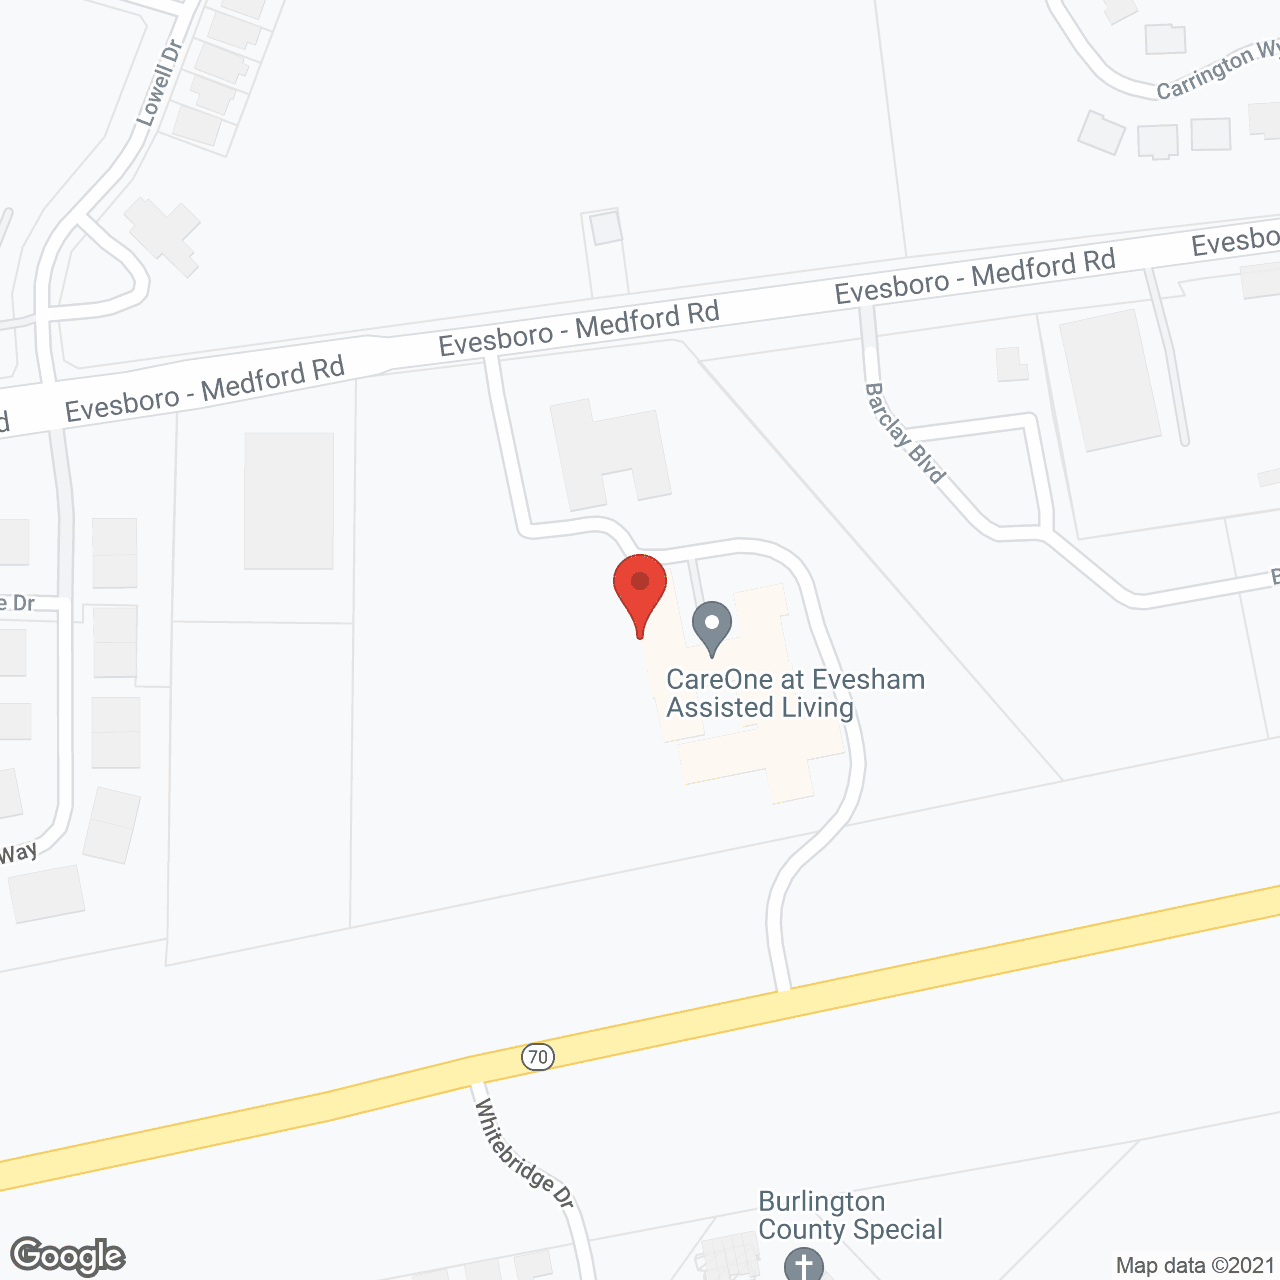 CareOne at Evesham in google map